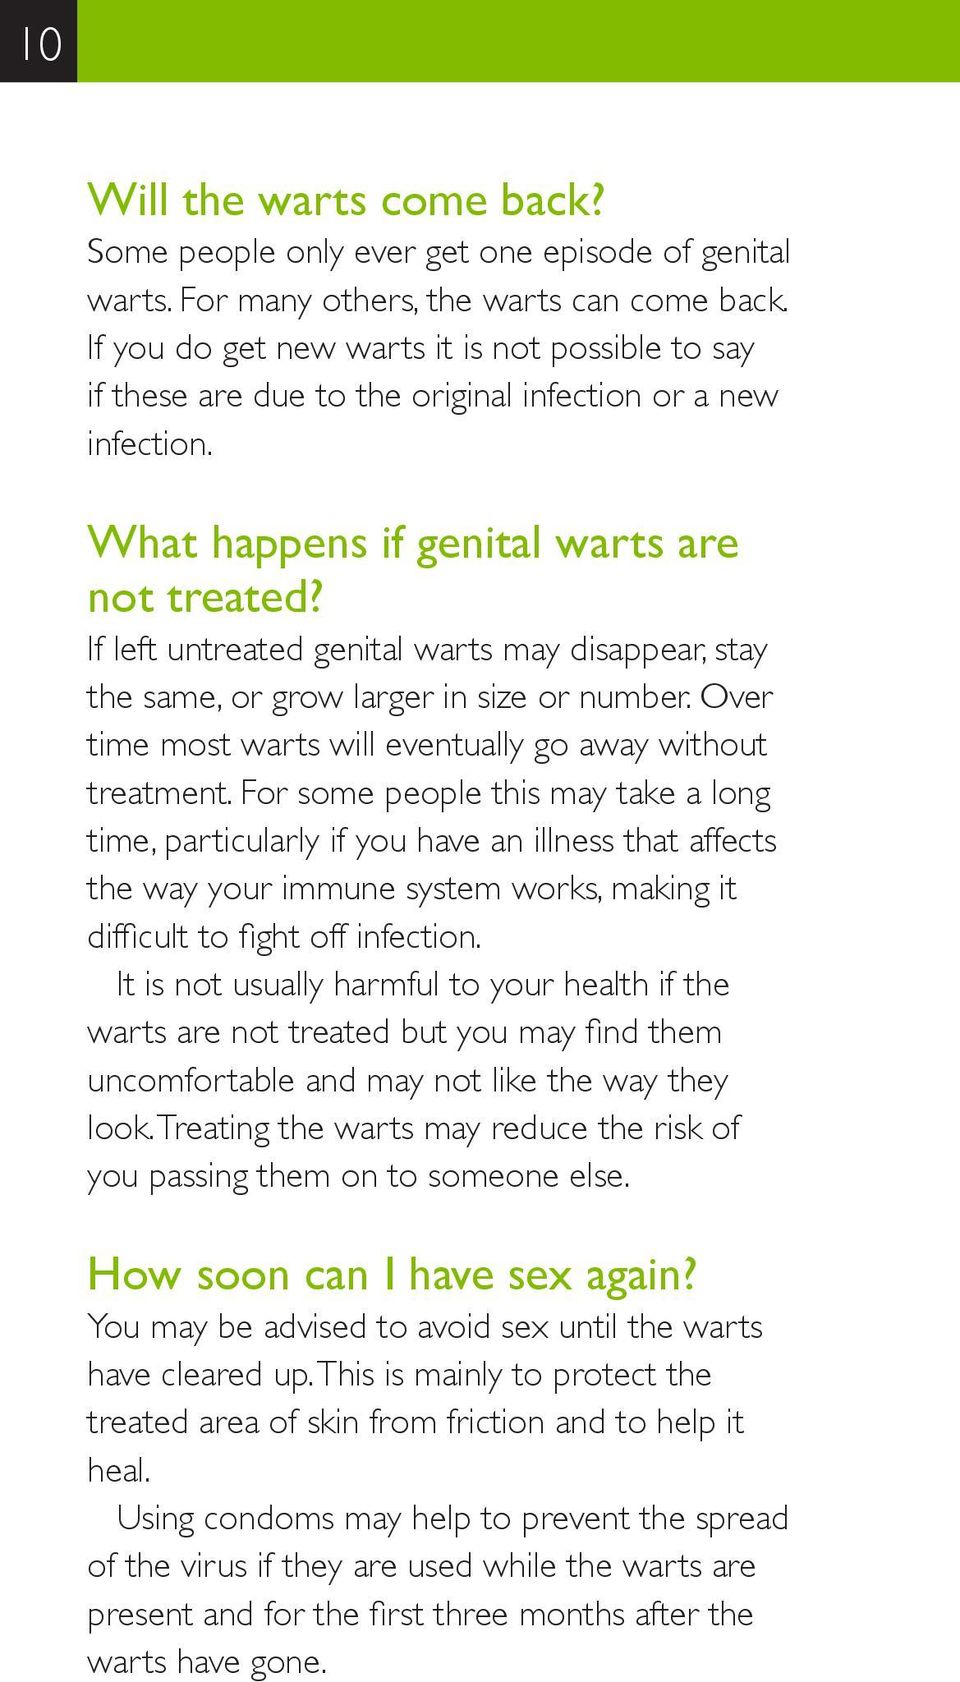 If left untreated genital warts may disappear, stay the same, or grow larger in size or number. Over time most warts will eventually go away without treatment.